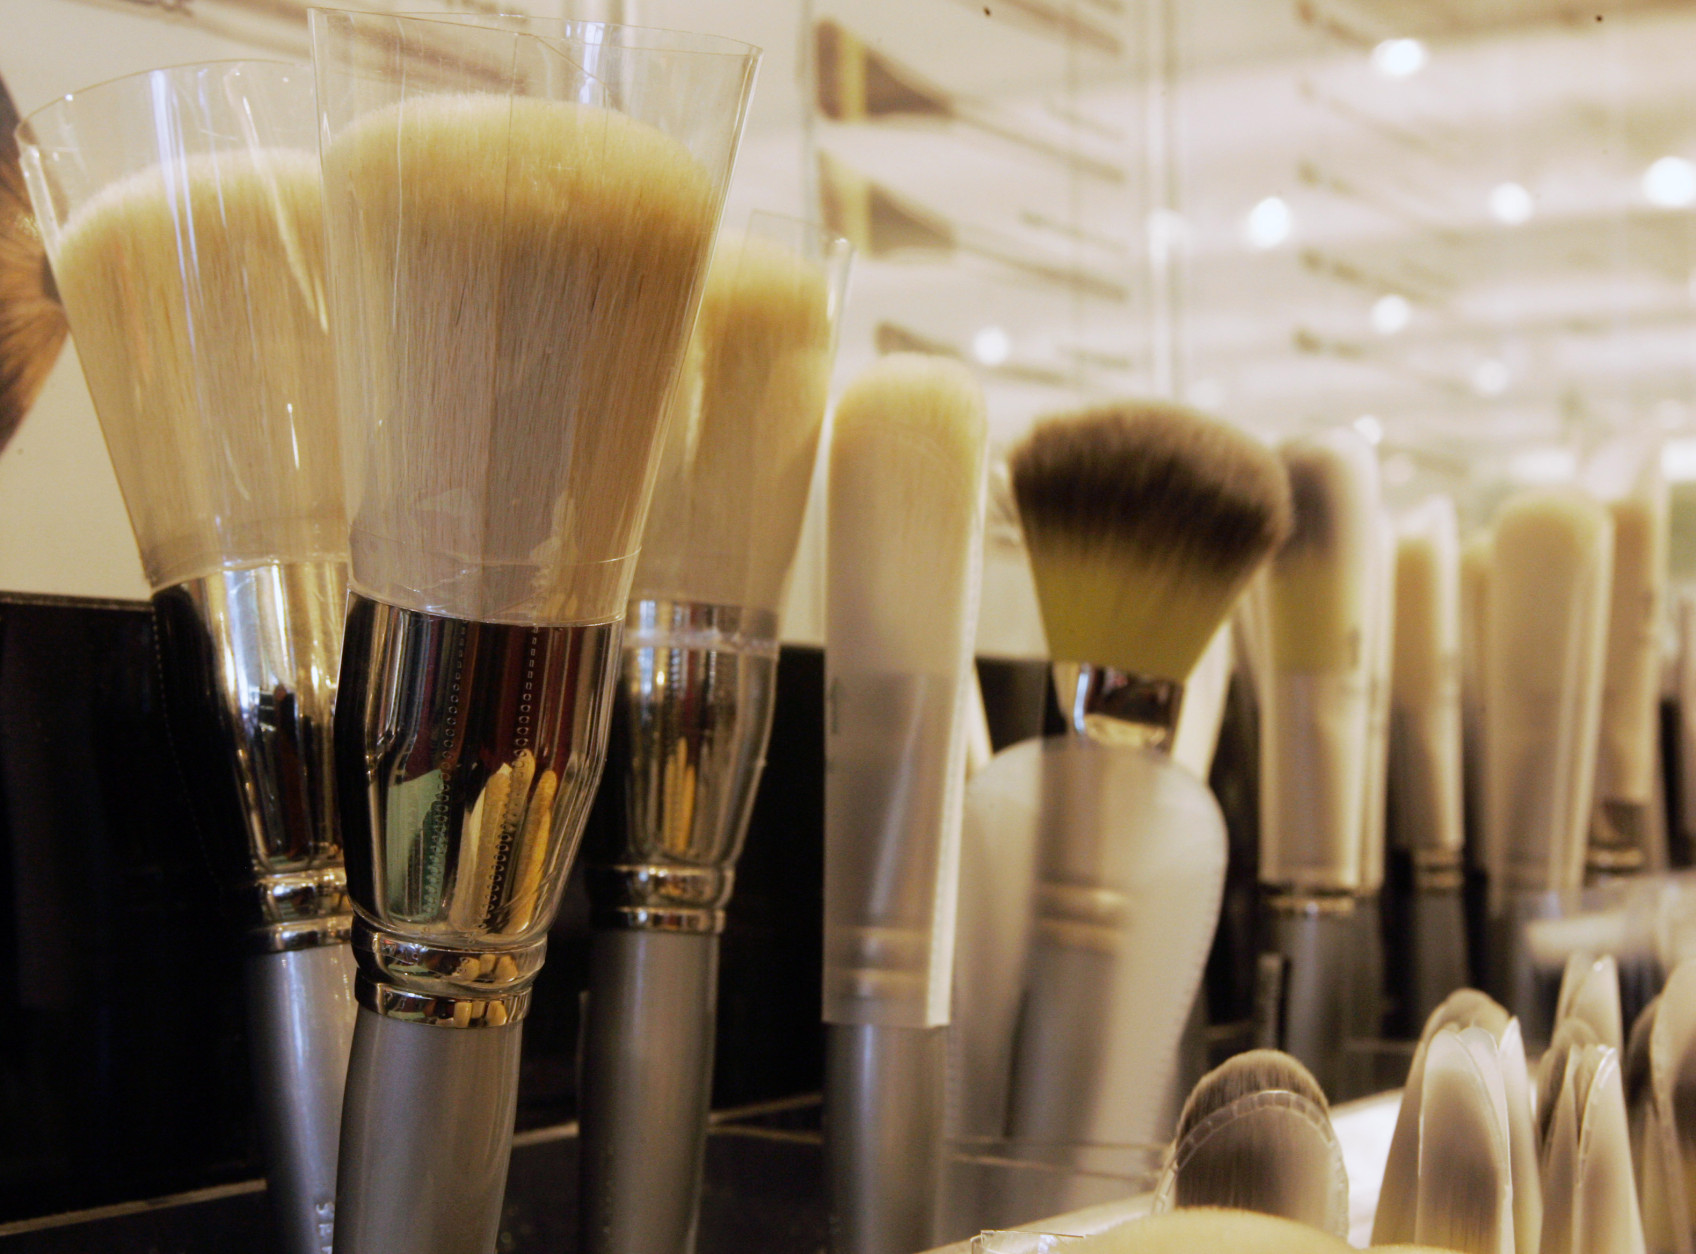 Your makeup brushes could be crawling with germs. An expert says brushes used for powders should be washed every couple of weeks -- weekly for those used on the eyes. (AP Photo/Wilfredo Lee)